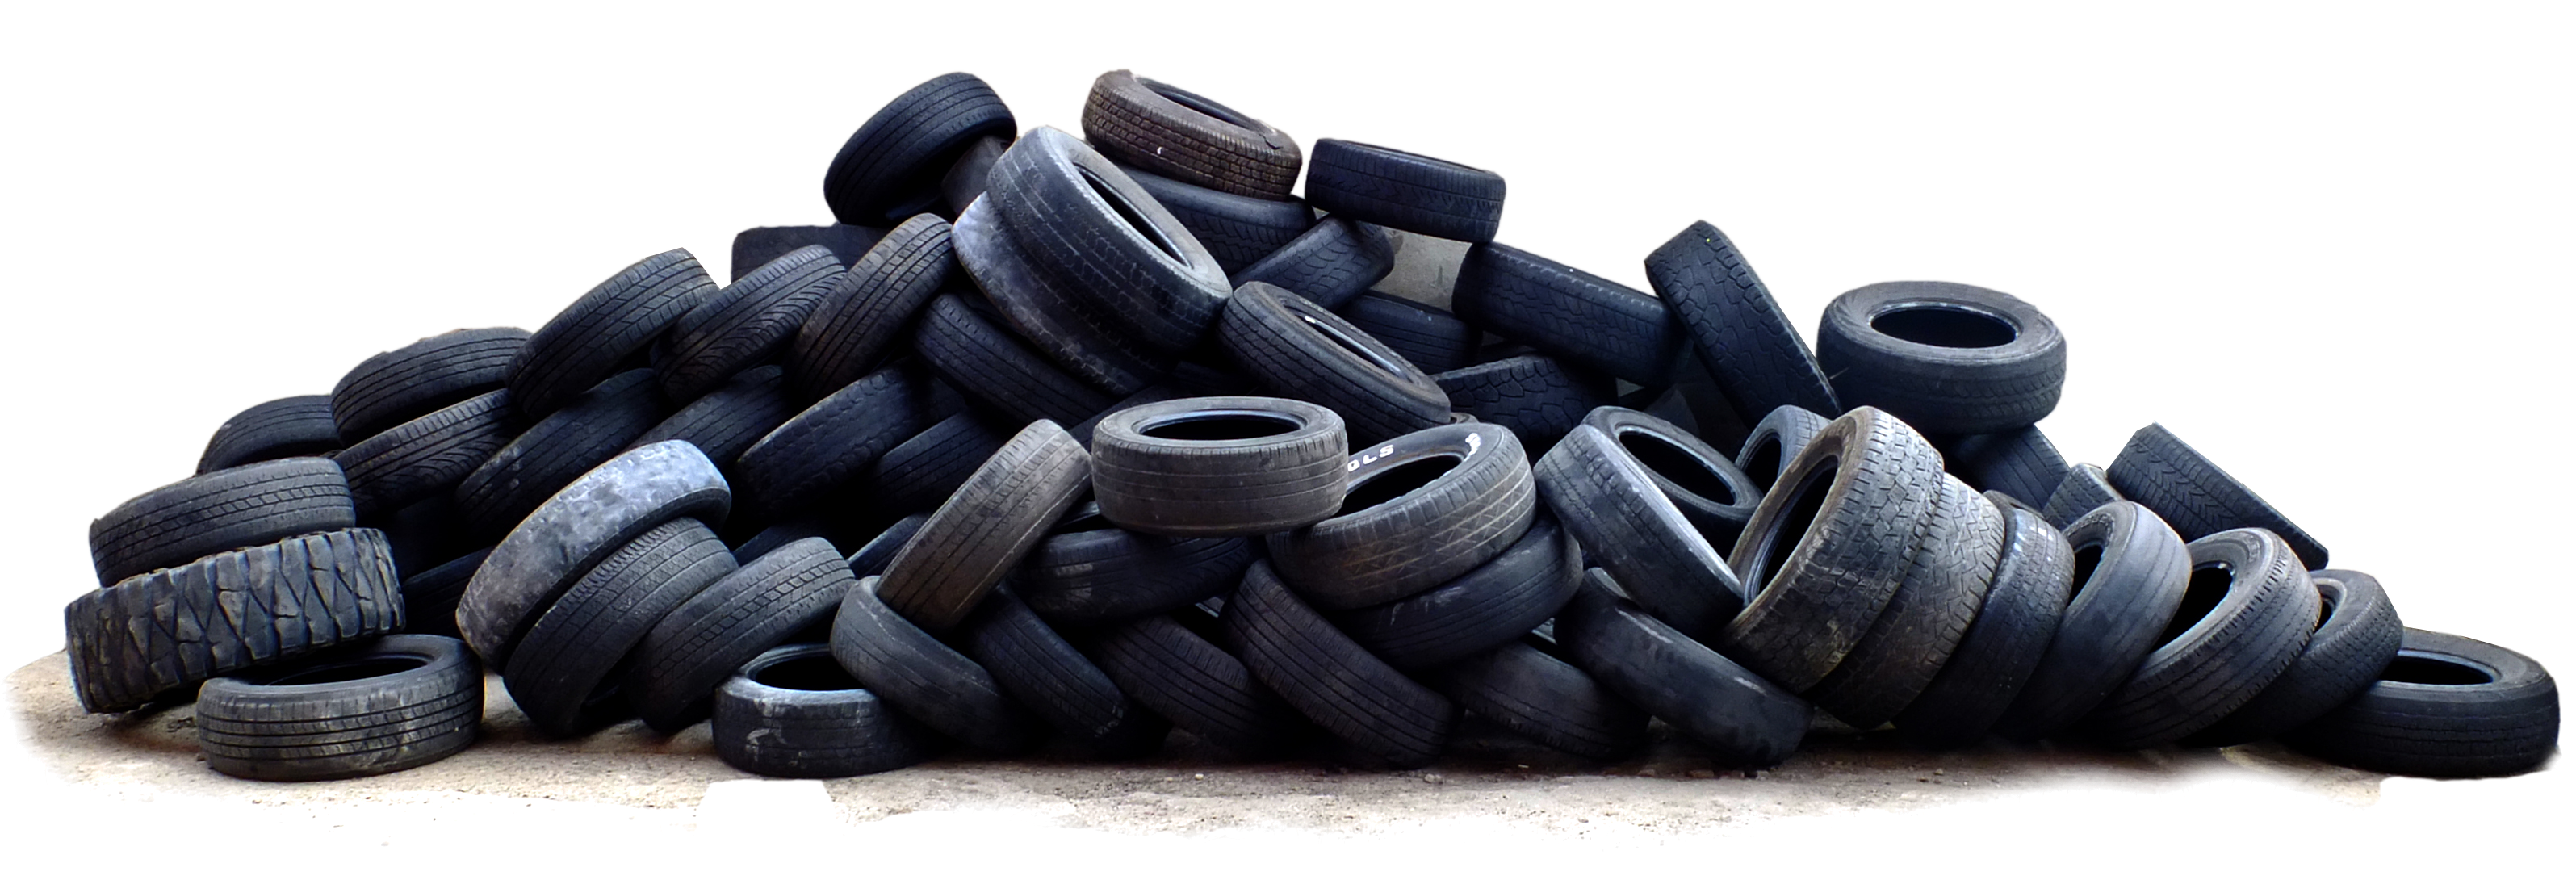 pile-of-tires2